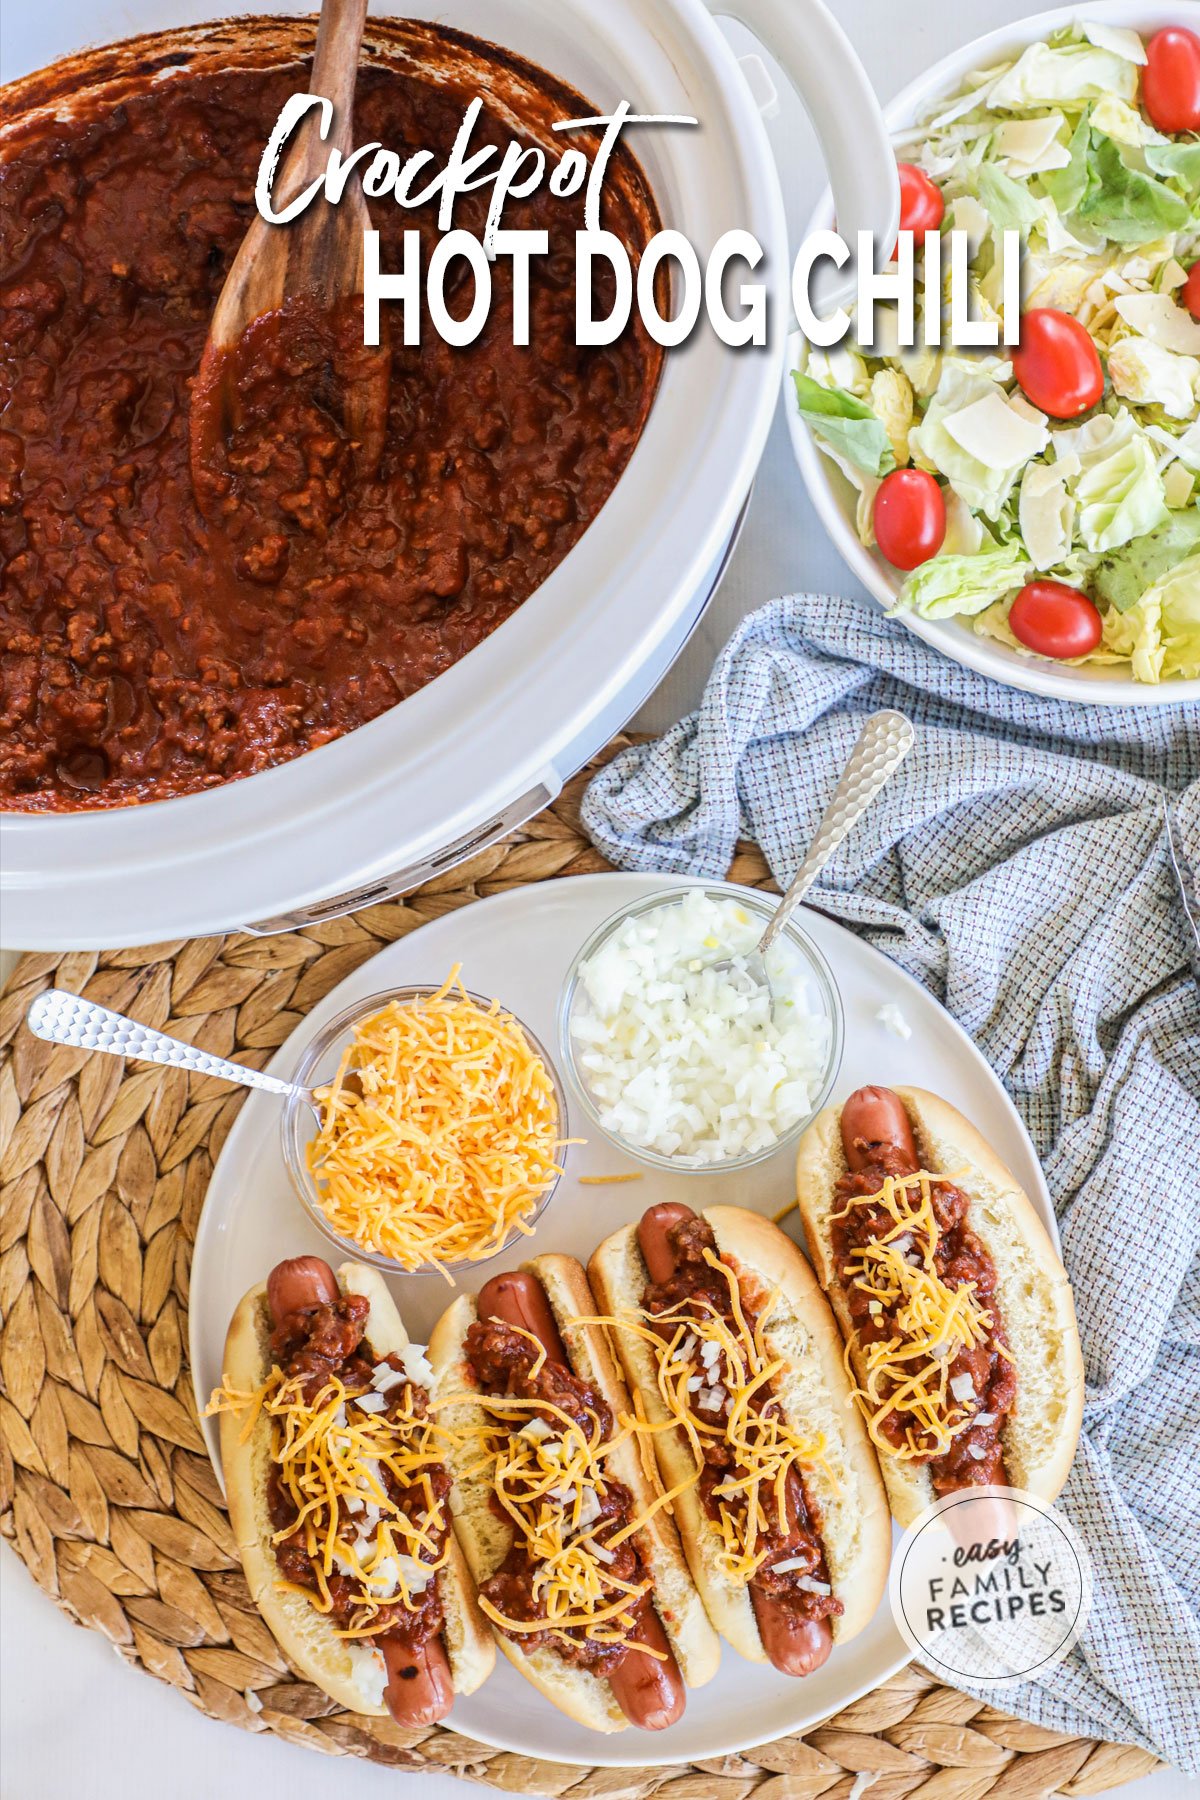 a Crock Pot full of chili next to a salad and a platter of chili dogs with cheese.